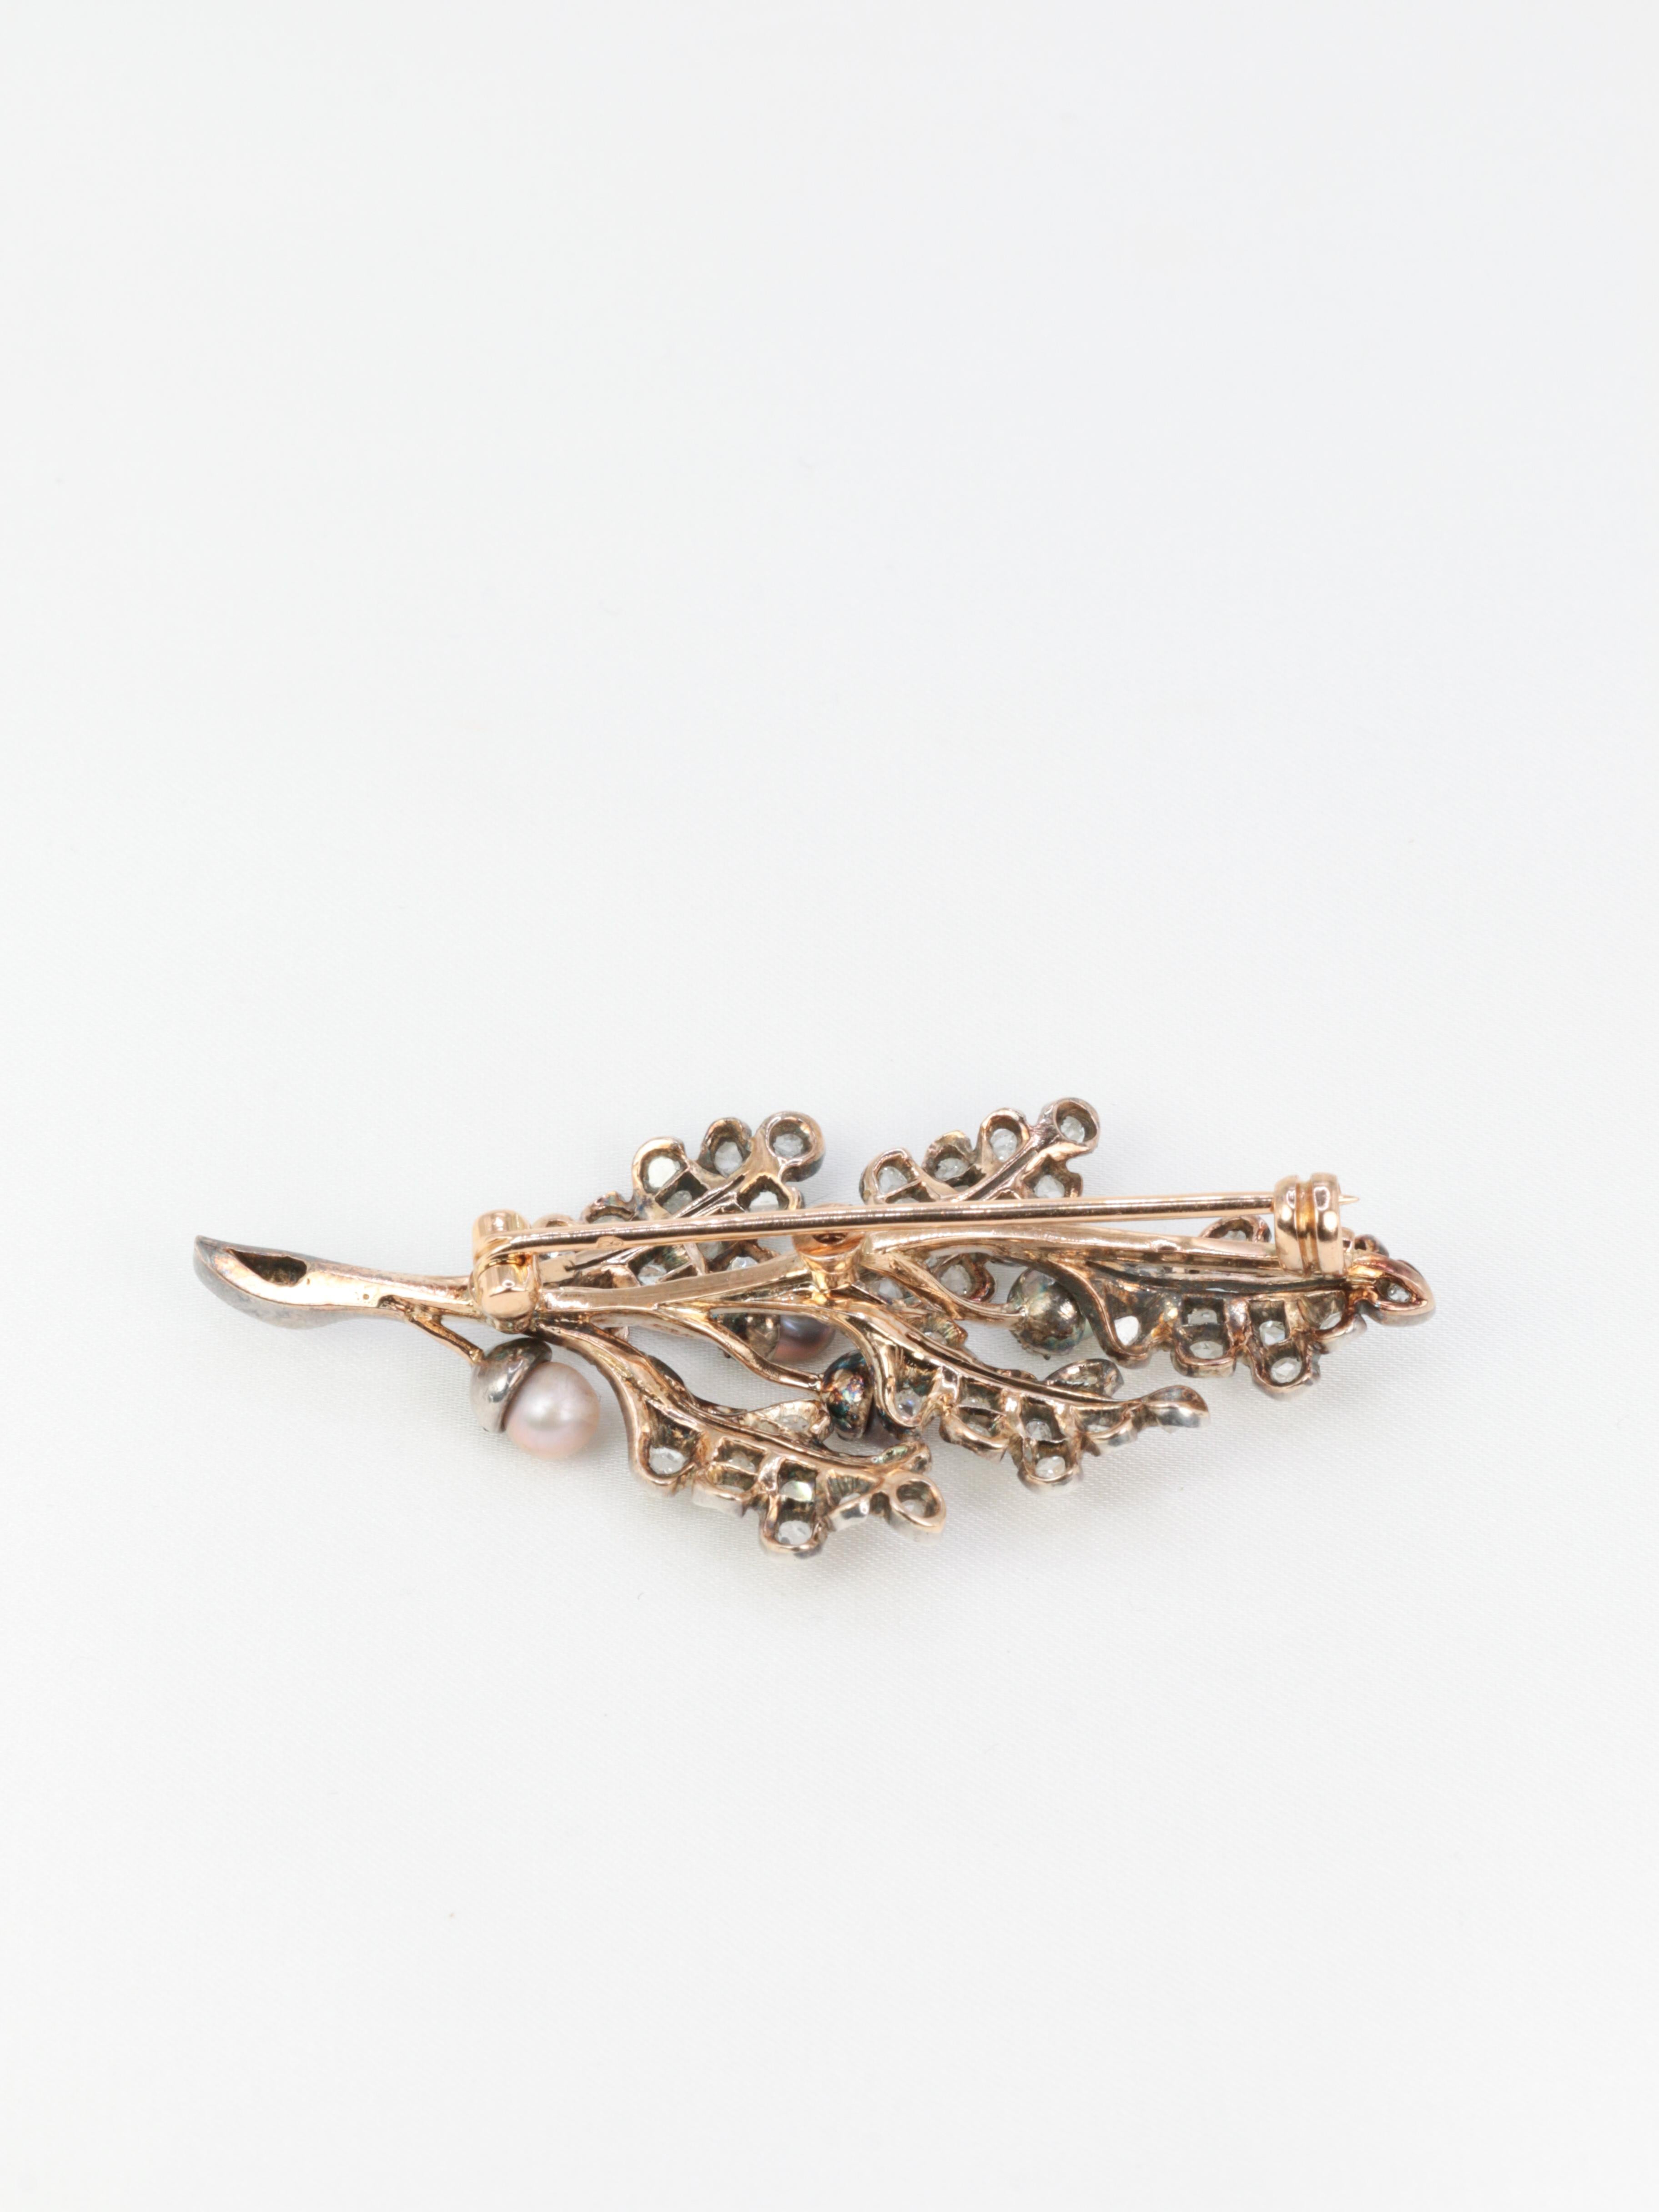 Women's Victorian Gold, Silver, Natural Pearls and Rose-Cut Diamond Leaf Brooch, circa